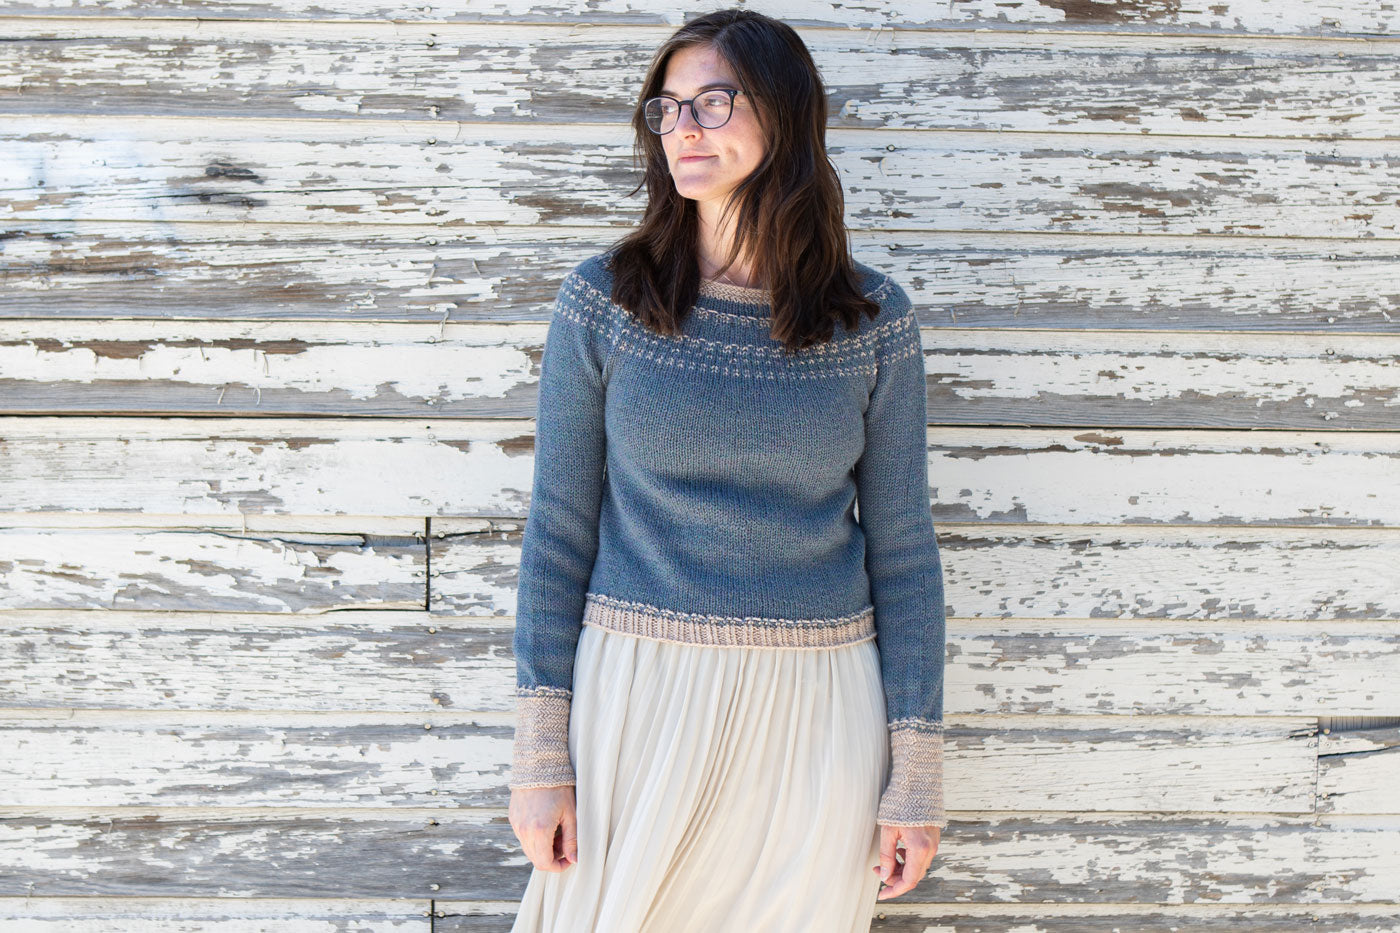 Flavia wears her Sprout Pullover, paired with a white skirt, she stands in front of a white fence while looking away.